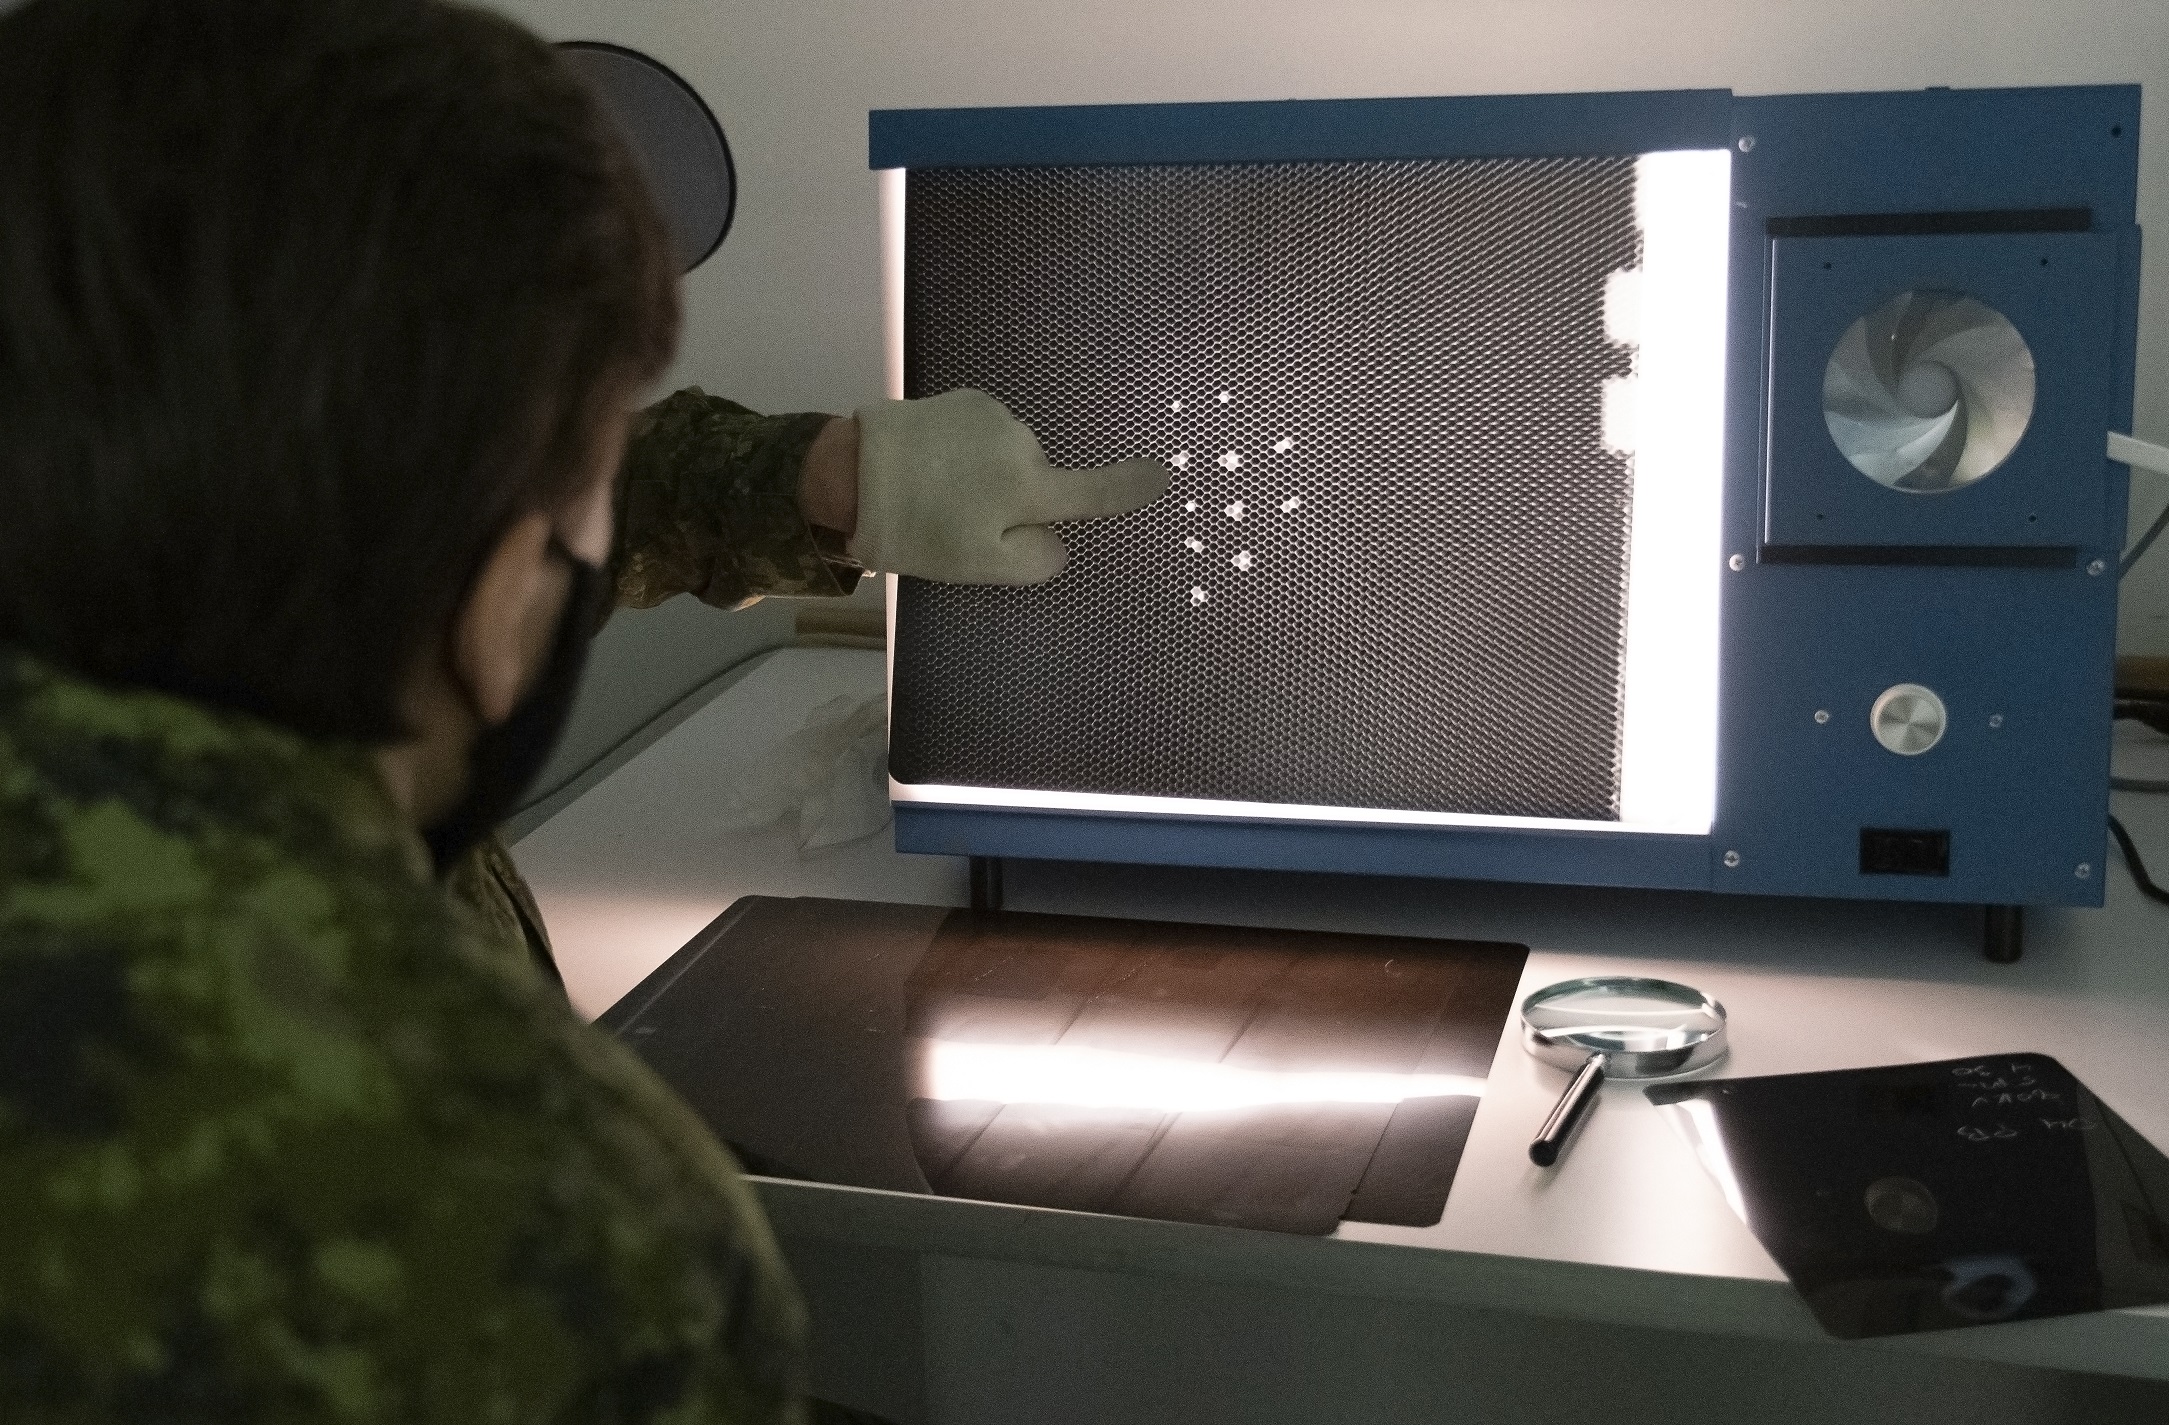 Taken in ATESS NDT Film viewing room. Interpreting Xray image of honeycomb core structure (used primarily in Aircraft flight controls) looking for Core damage, Water ingress or other defect in the flight control core. Cpl Eddy Ford, 8 AMS NDT Support 
Cpl Maggie Selley, ATESS, NDT TRG and DEV